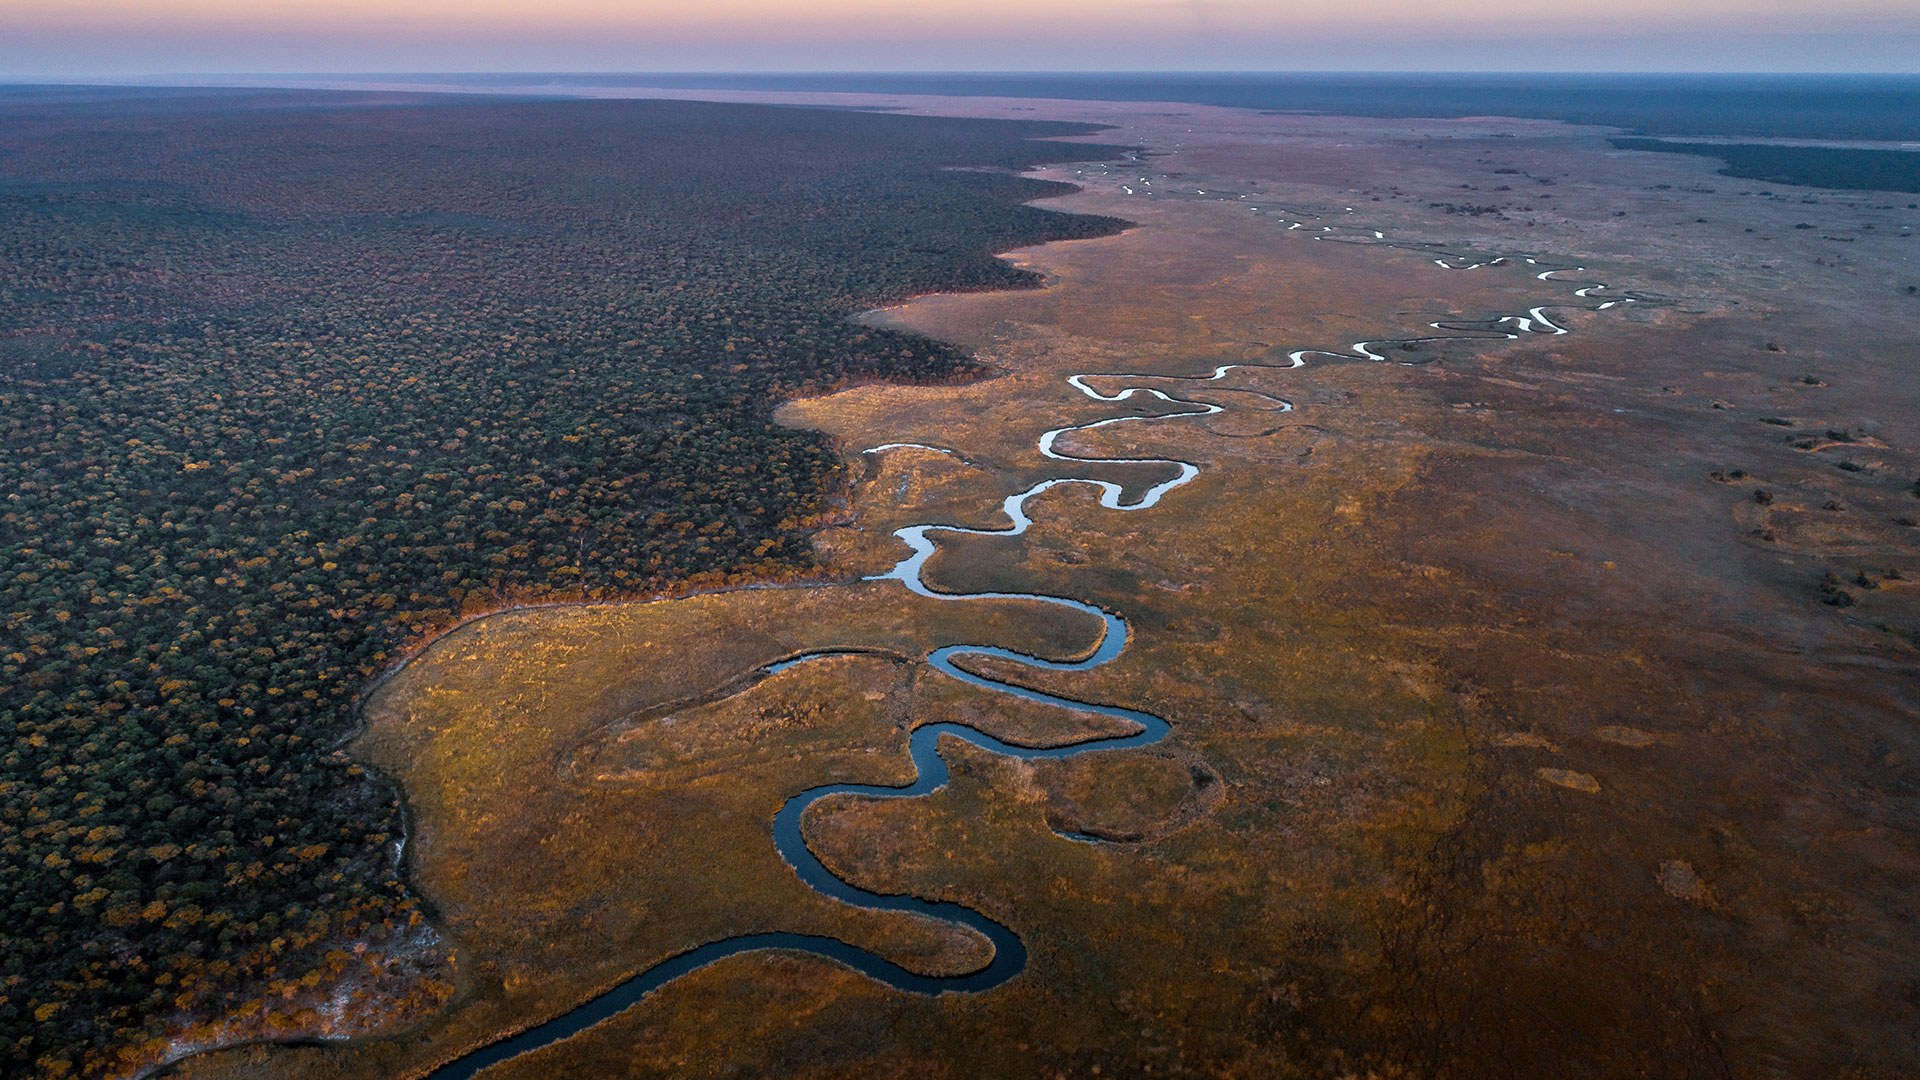 An aerial view of the rivers and forests of the source lakes region, Angola